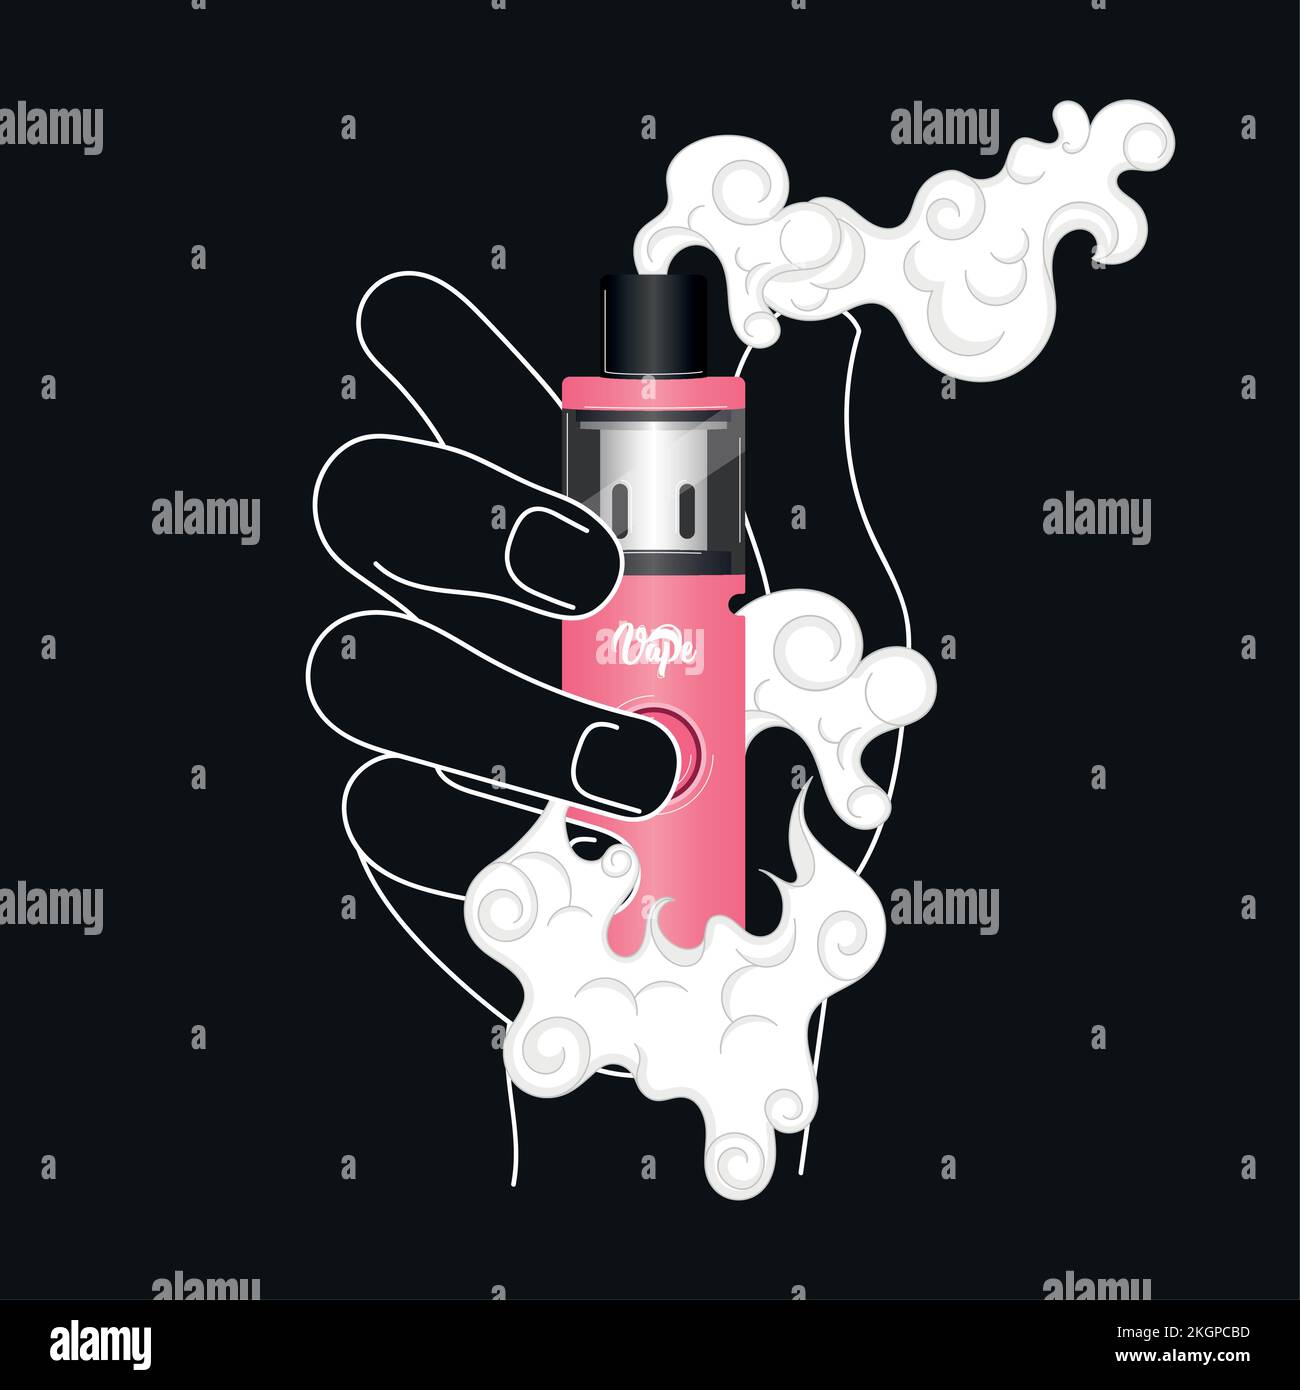 Hand holding a pink electronic cigarette icon Vector Stock Vector